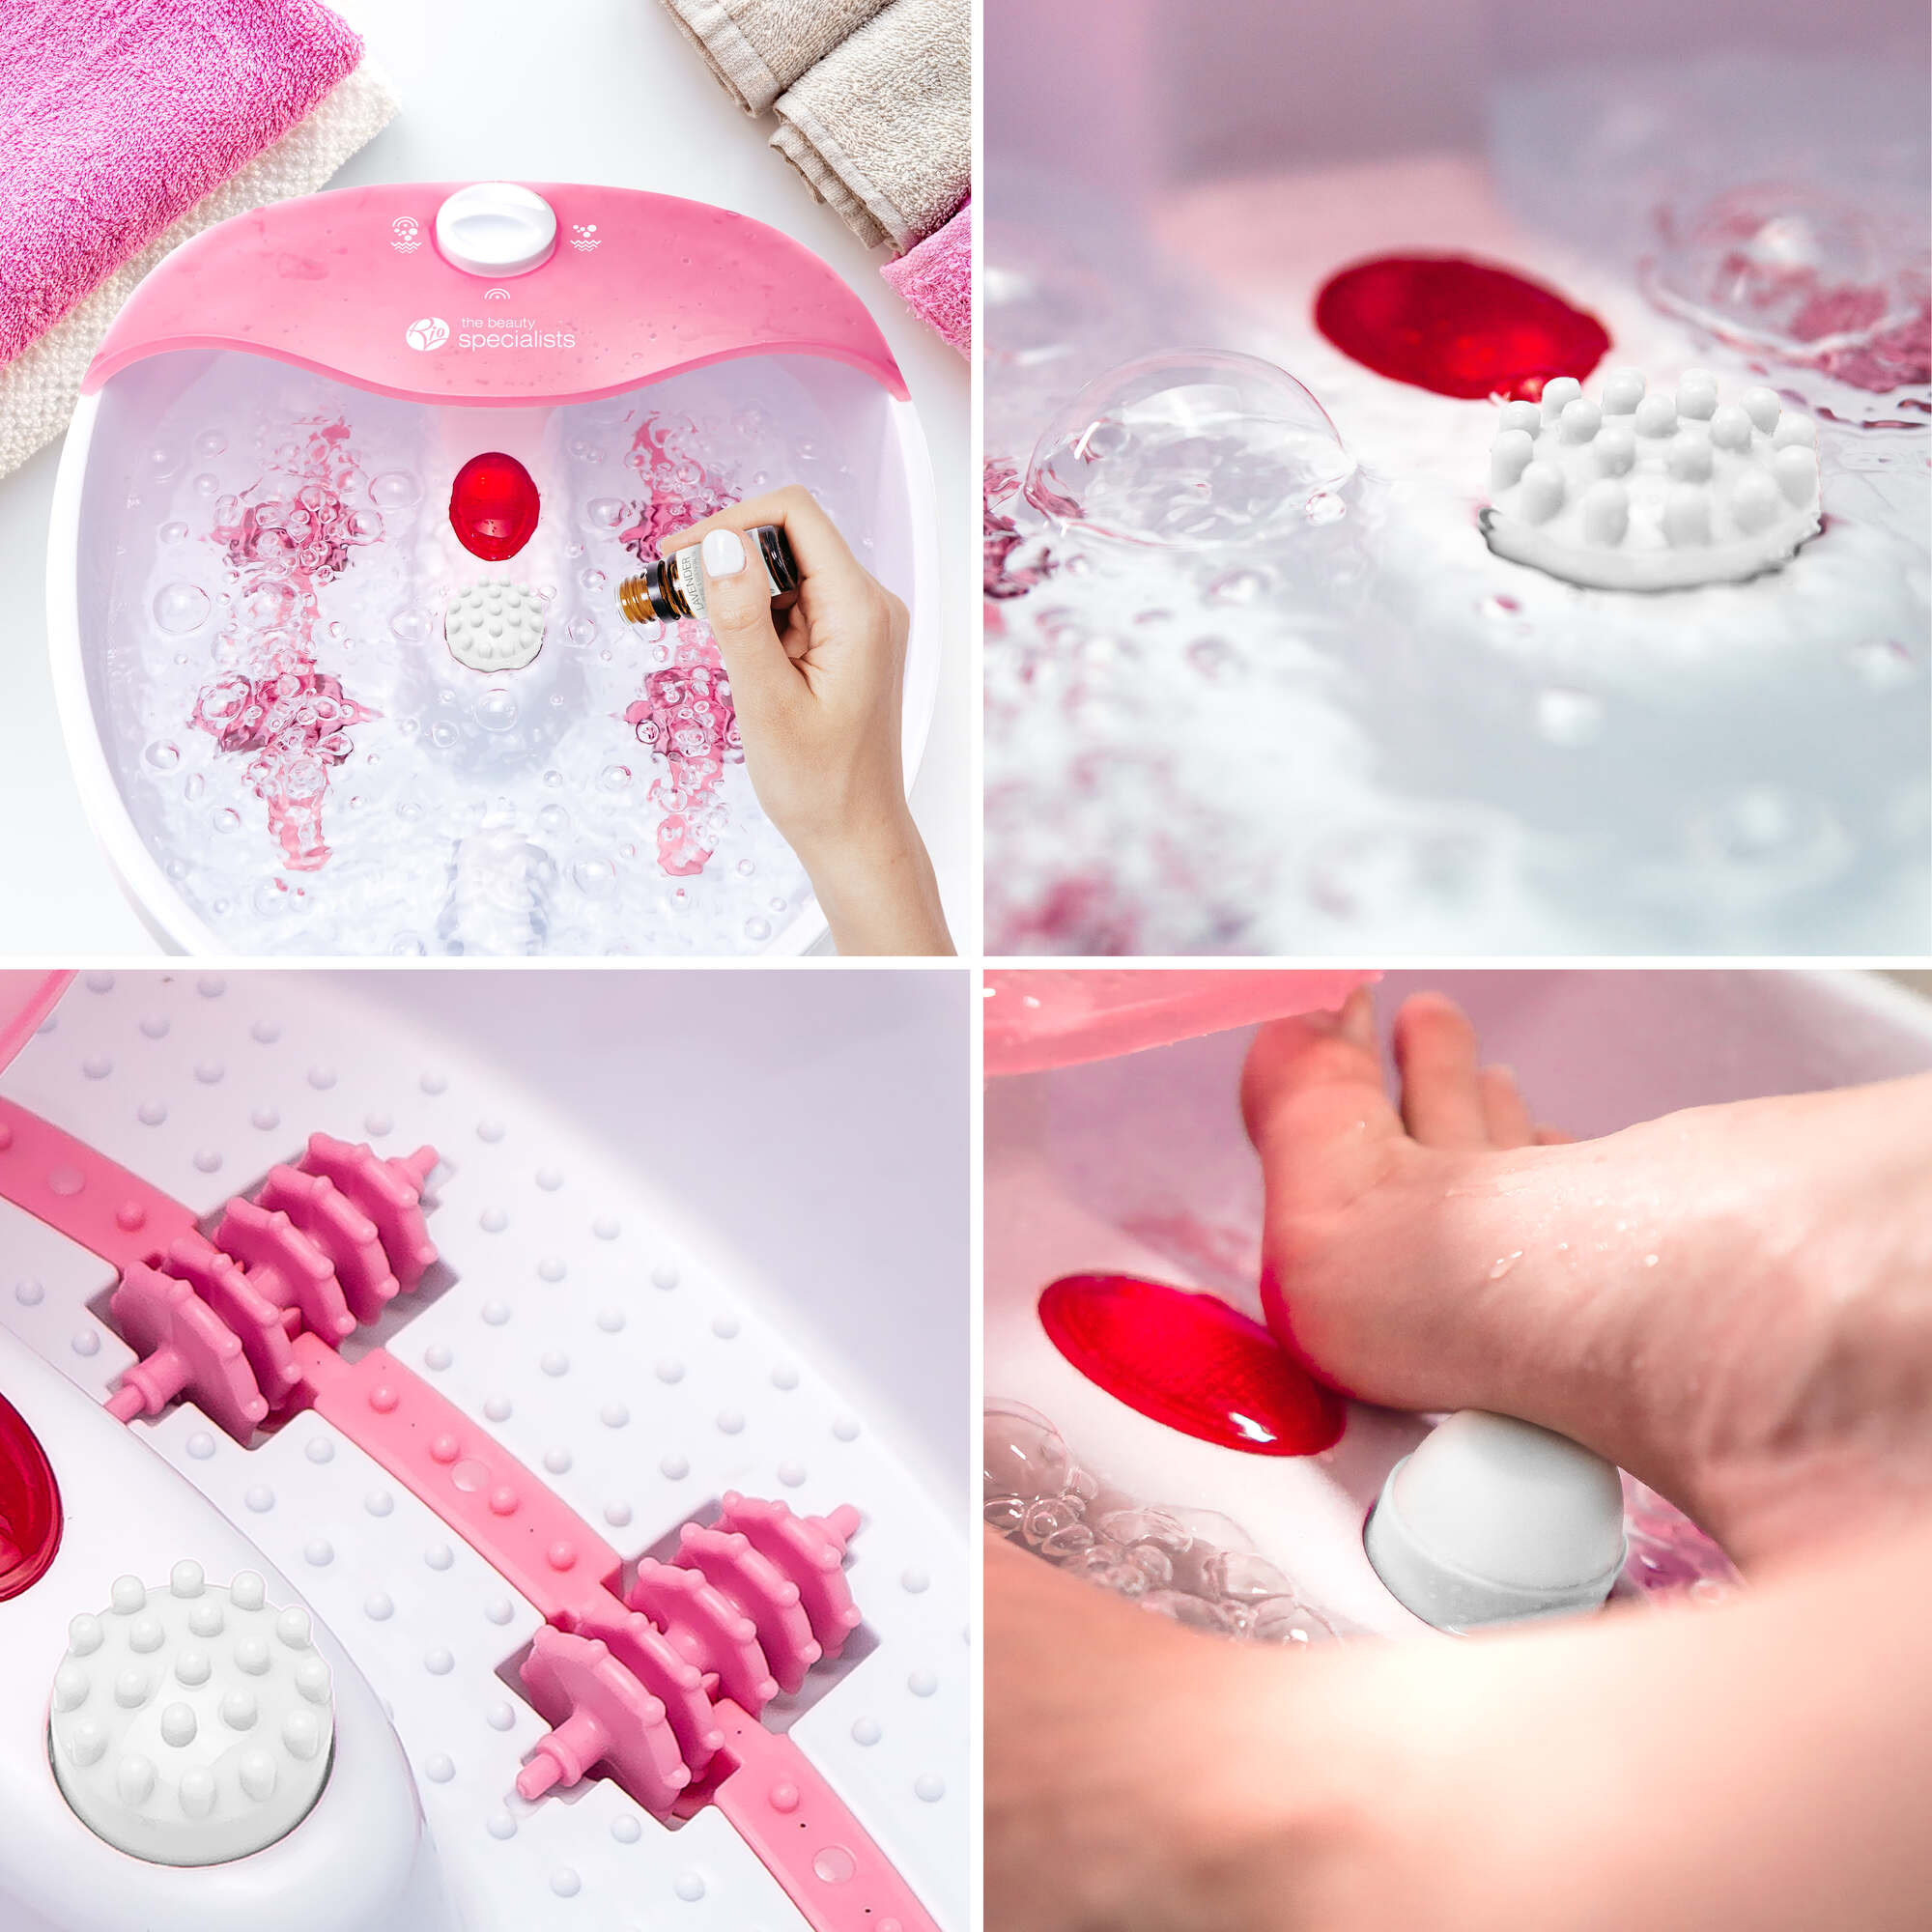 Soothing Waves Foot Bath Spa & Massager